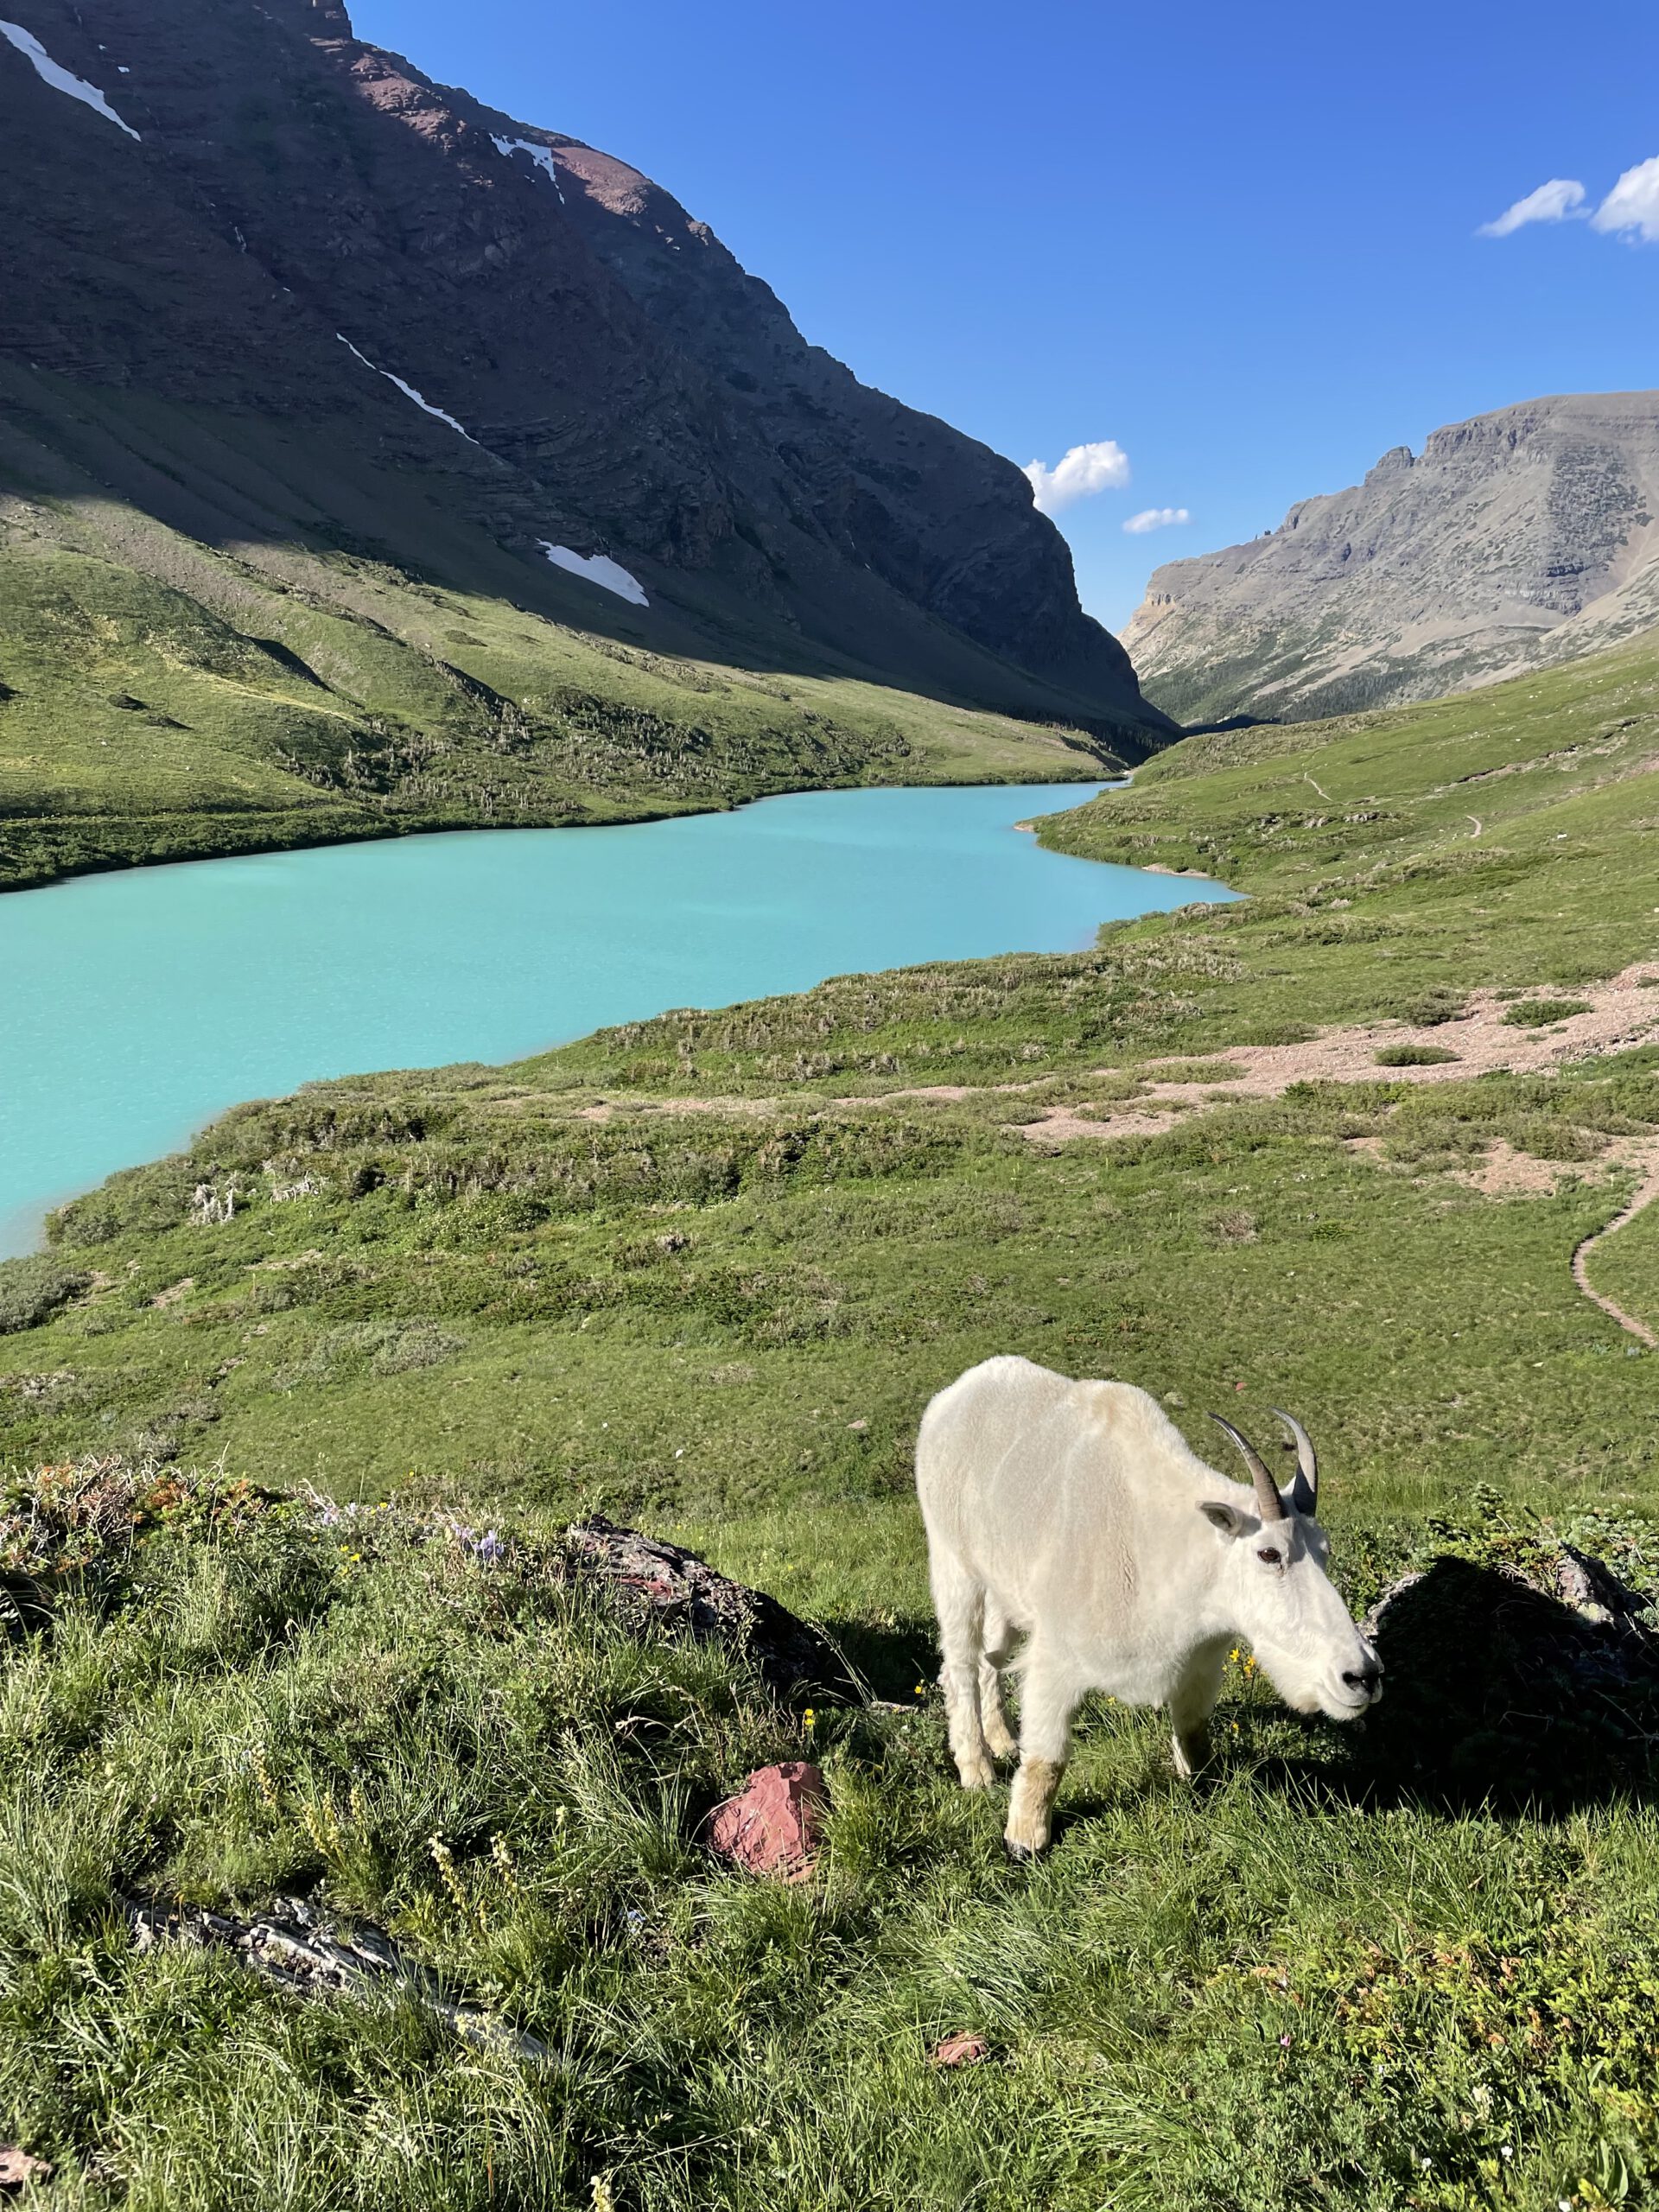 Mountain goat at lake in backcountry campground in Glacier National Park